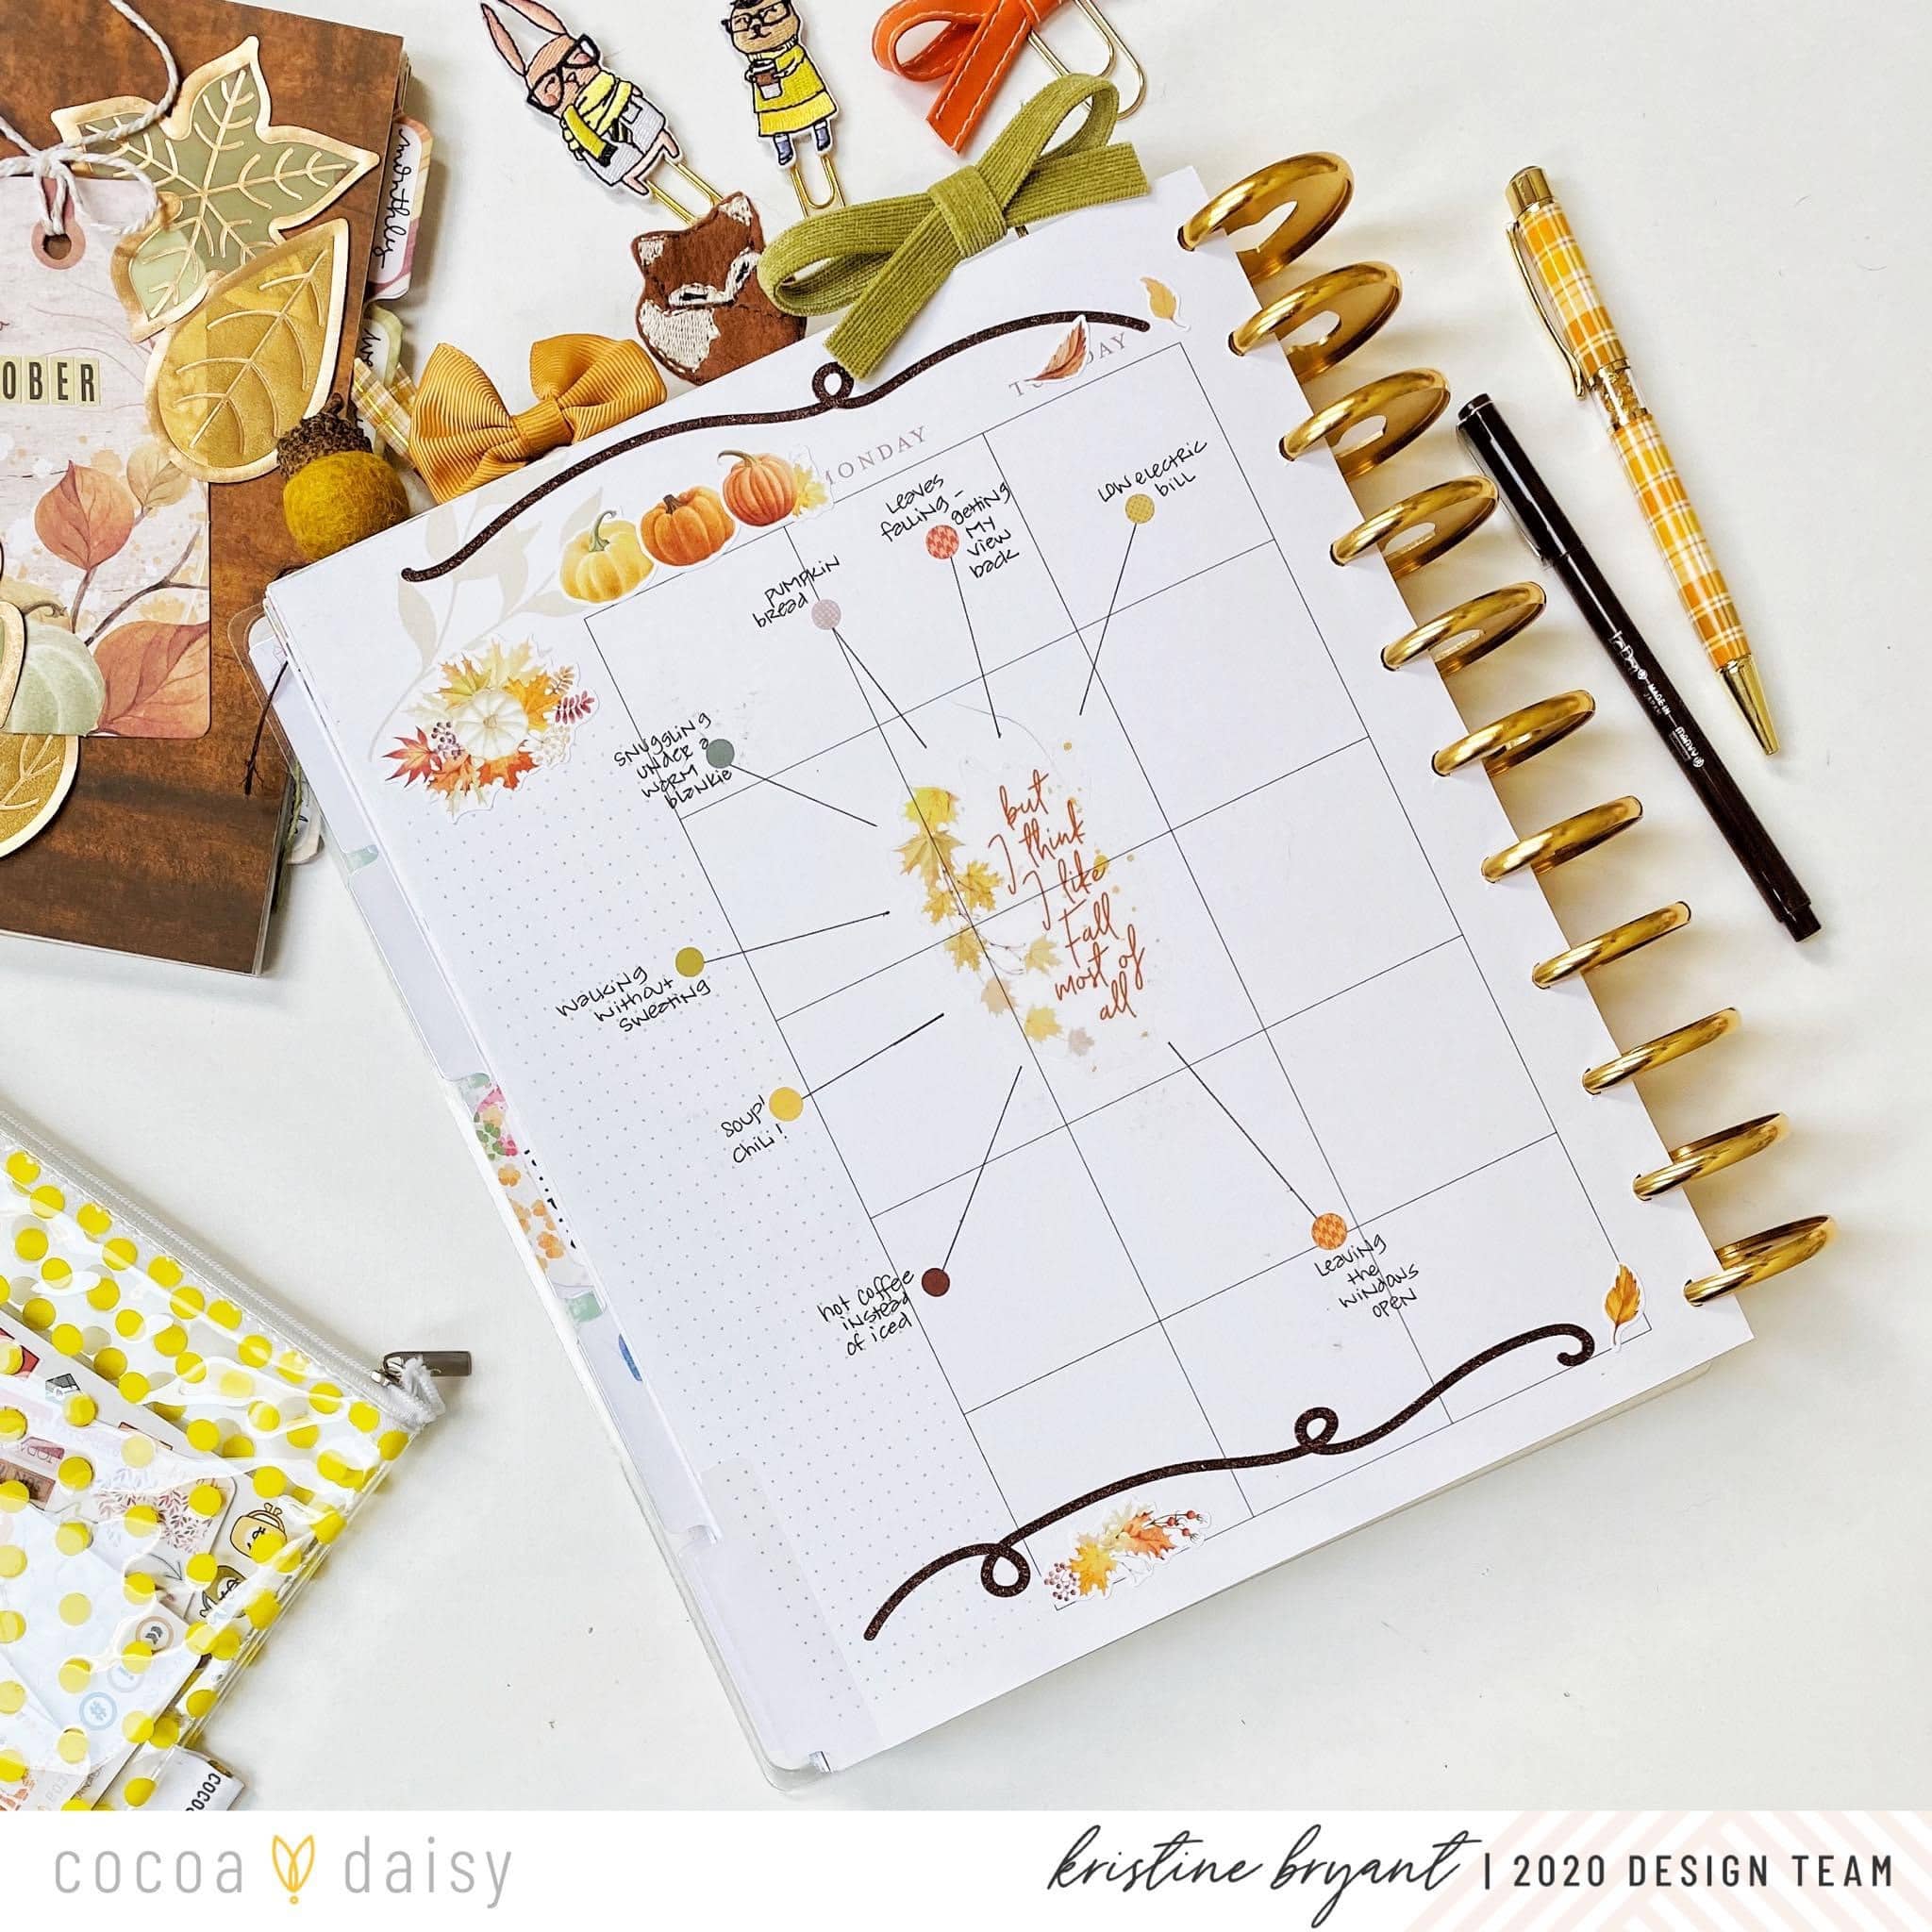 Design Inspiration with the Memory Keeping Sticker Kit